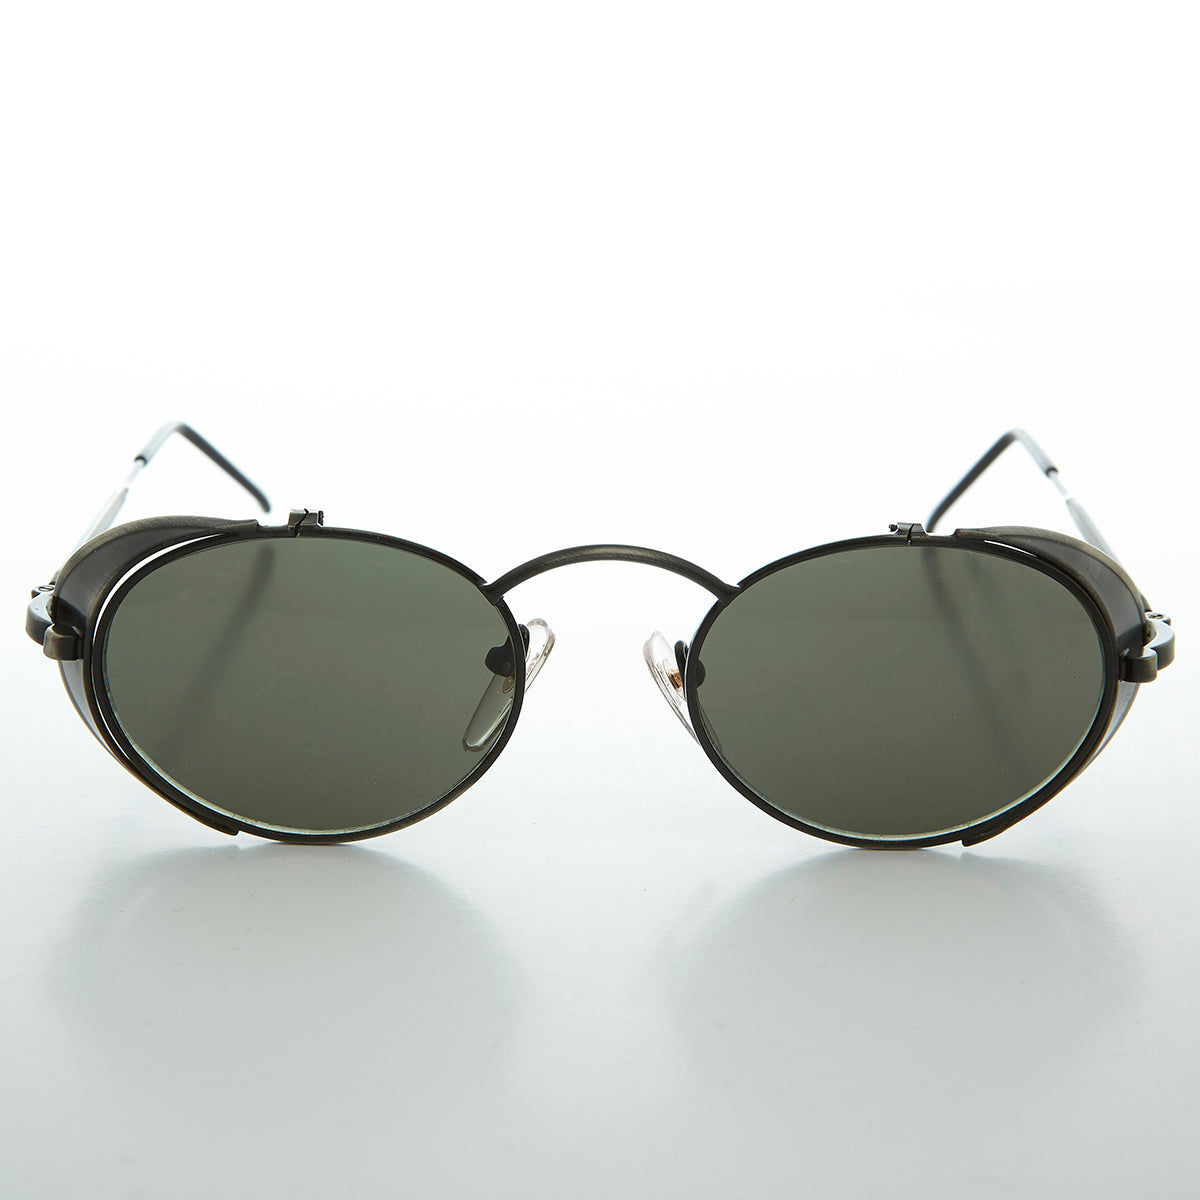 Steampunk Goggle Sunglass with Side Shields Vintage - Orson